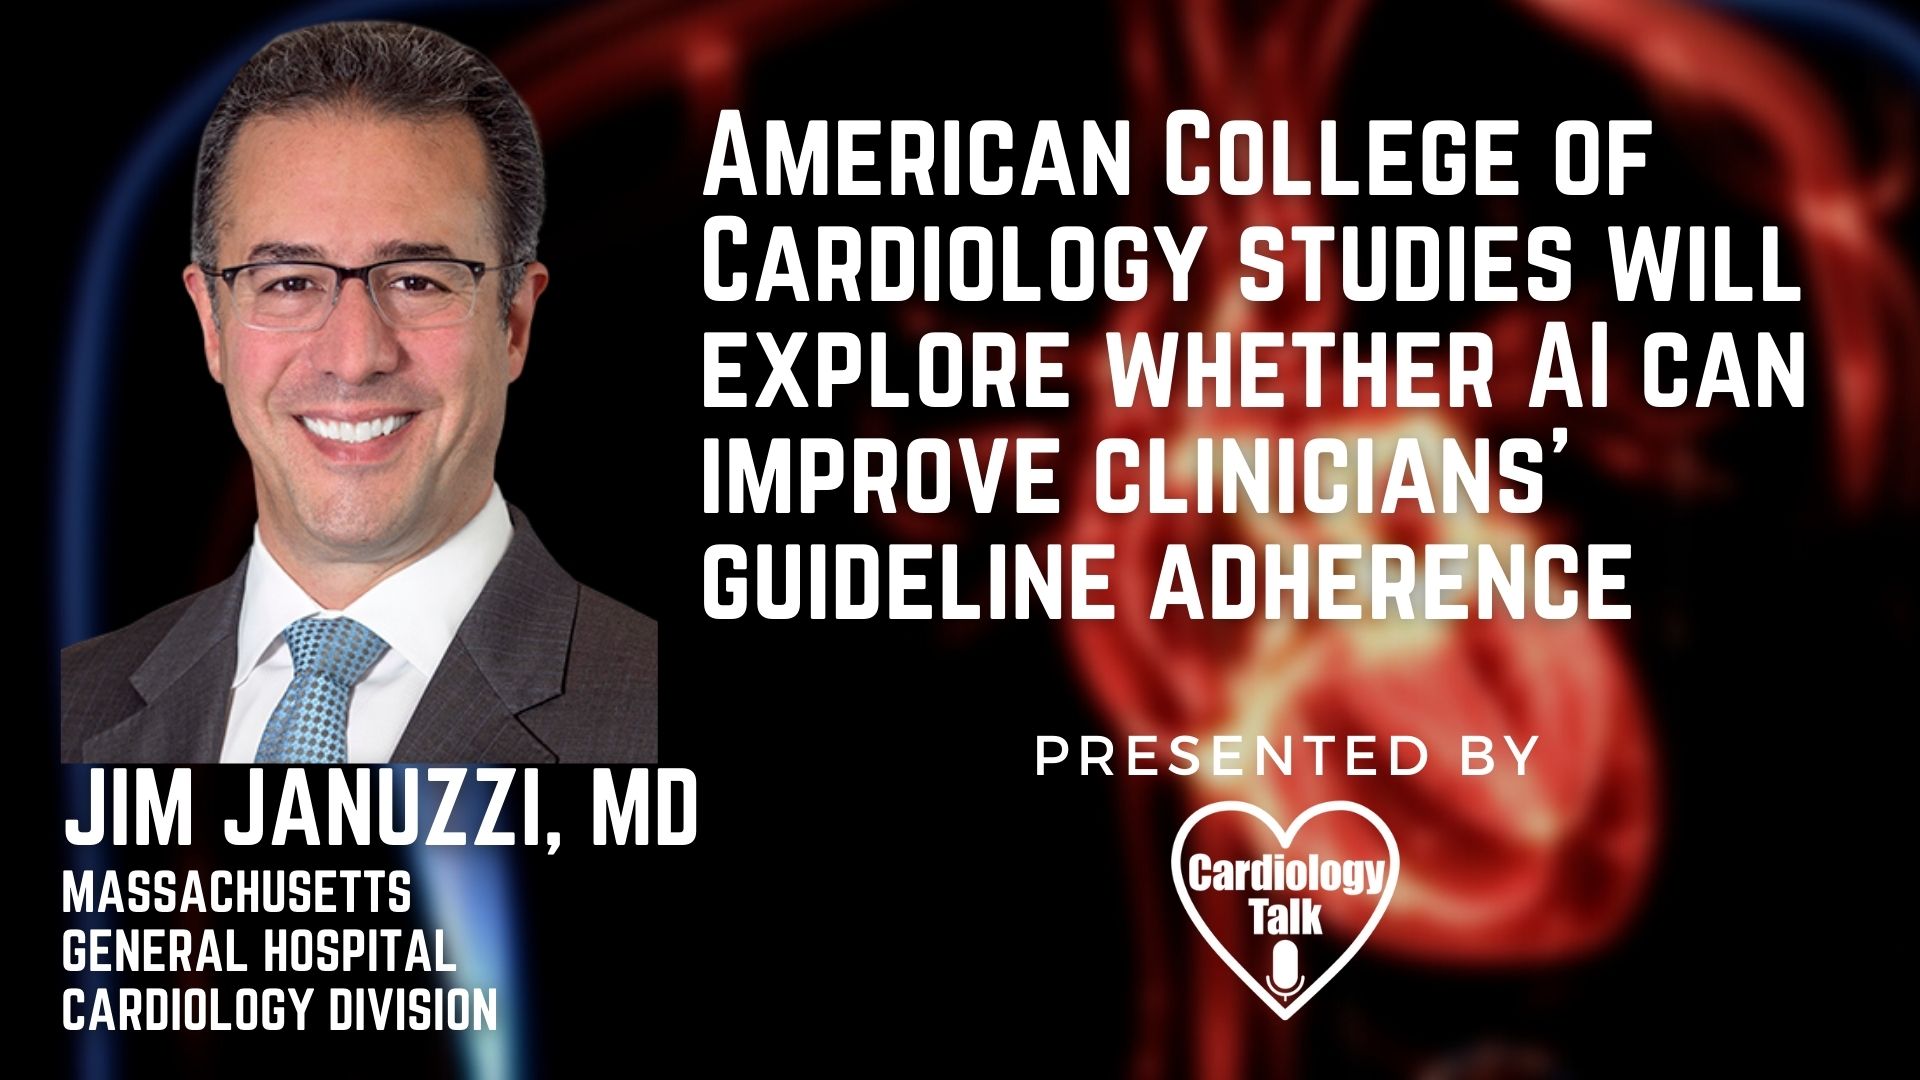 Jim Januzzi, MD @JJheart_doc @MGHHeartHealth #Cardiology #Research ACC Studies Will Explore Whether AI Can Improve Clinicians' Guideline Adherence